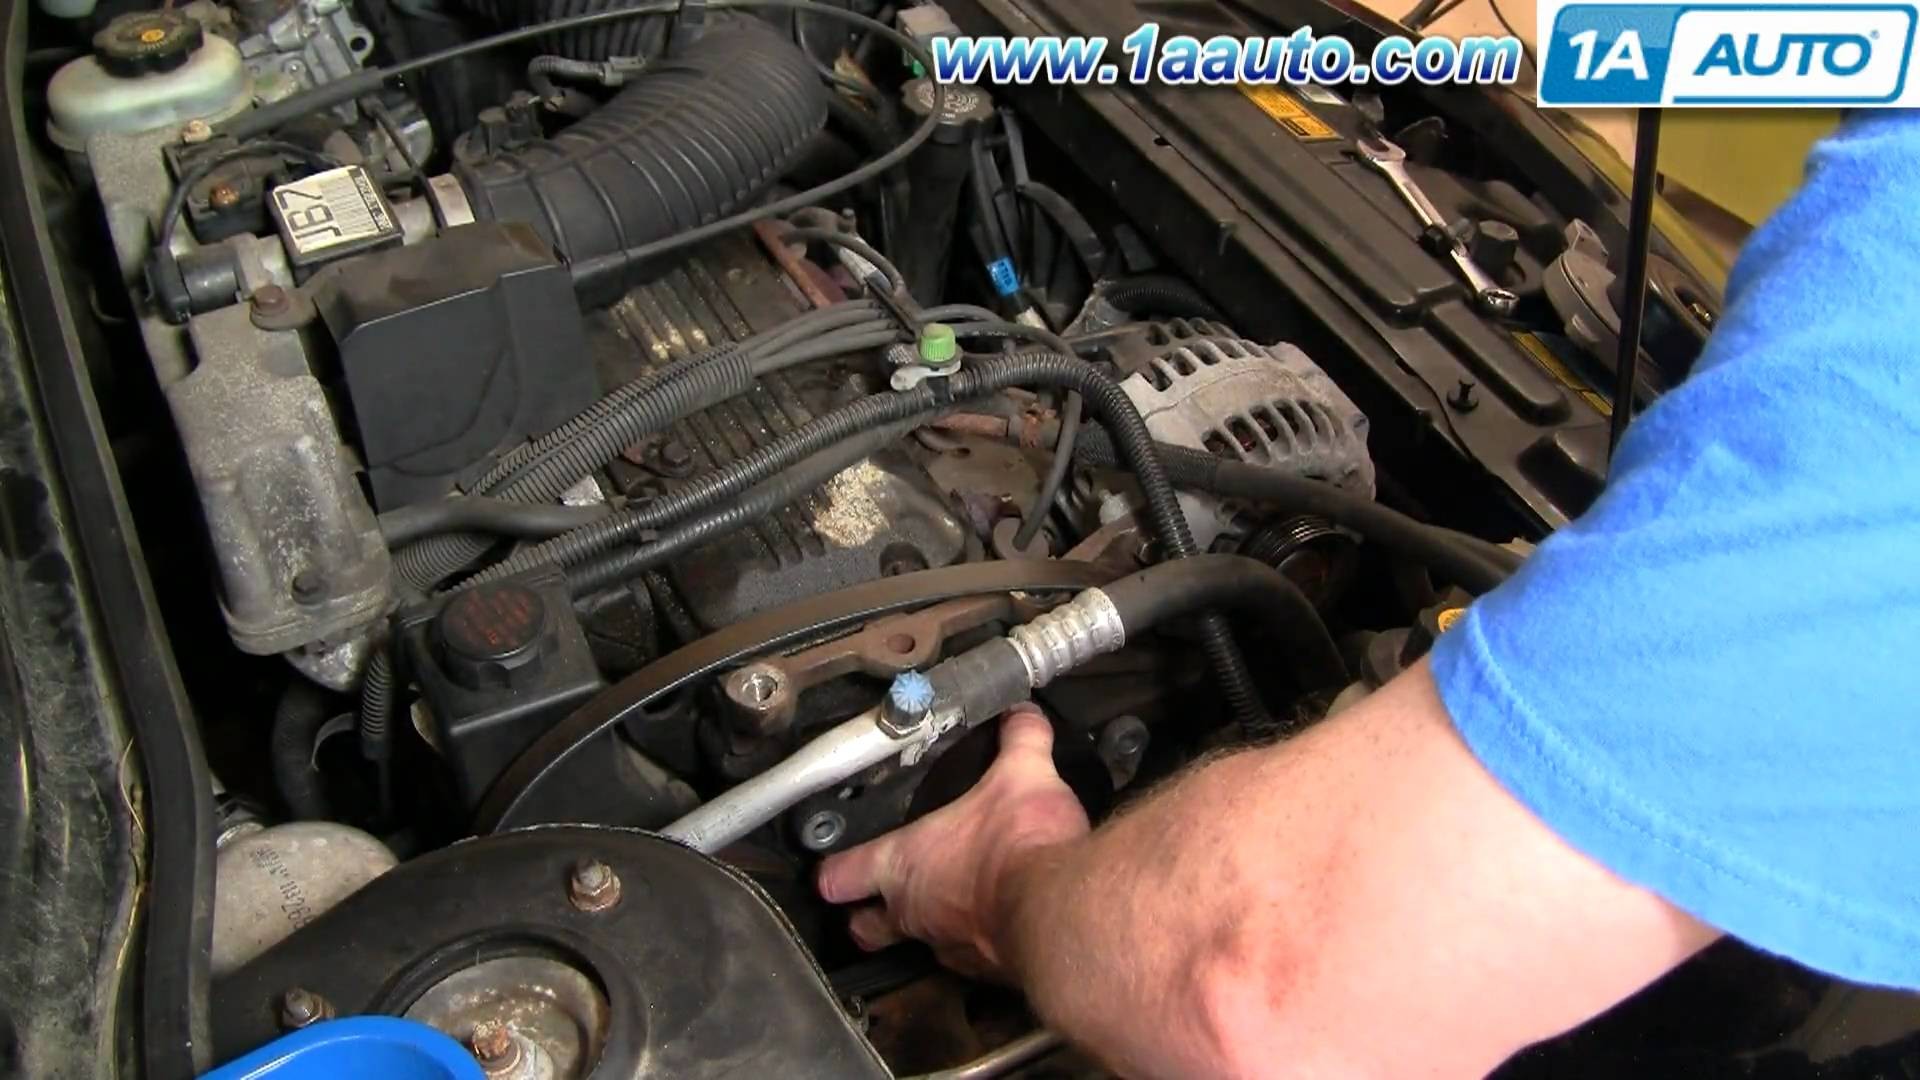 Pontiac Sunfire Engine Diagram How to Install Replace Serpentine Belt Tensioner Chevy Cavalier